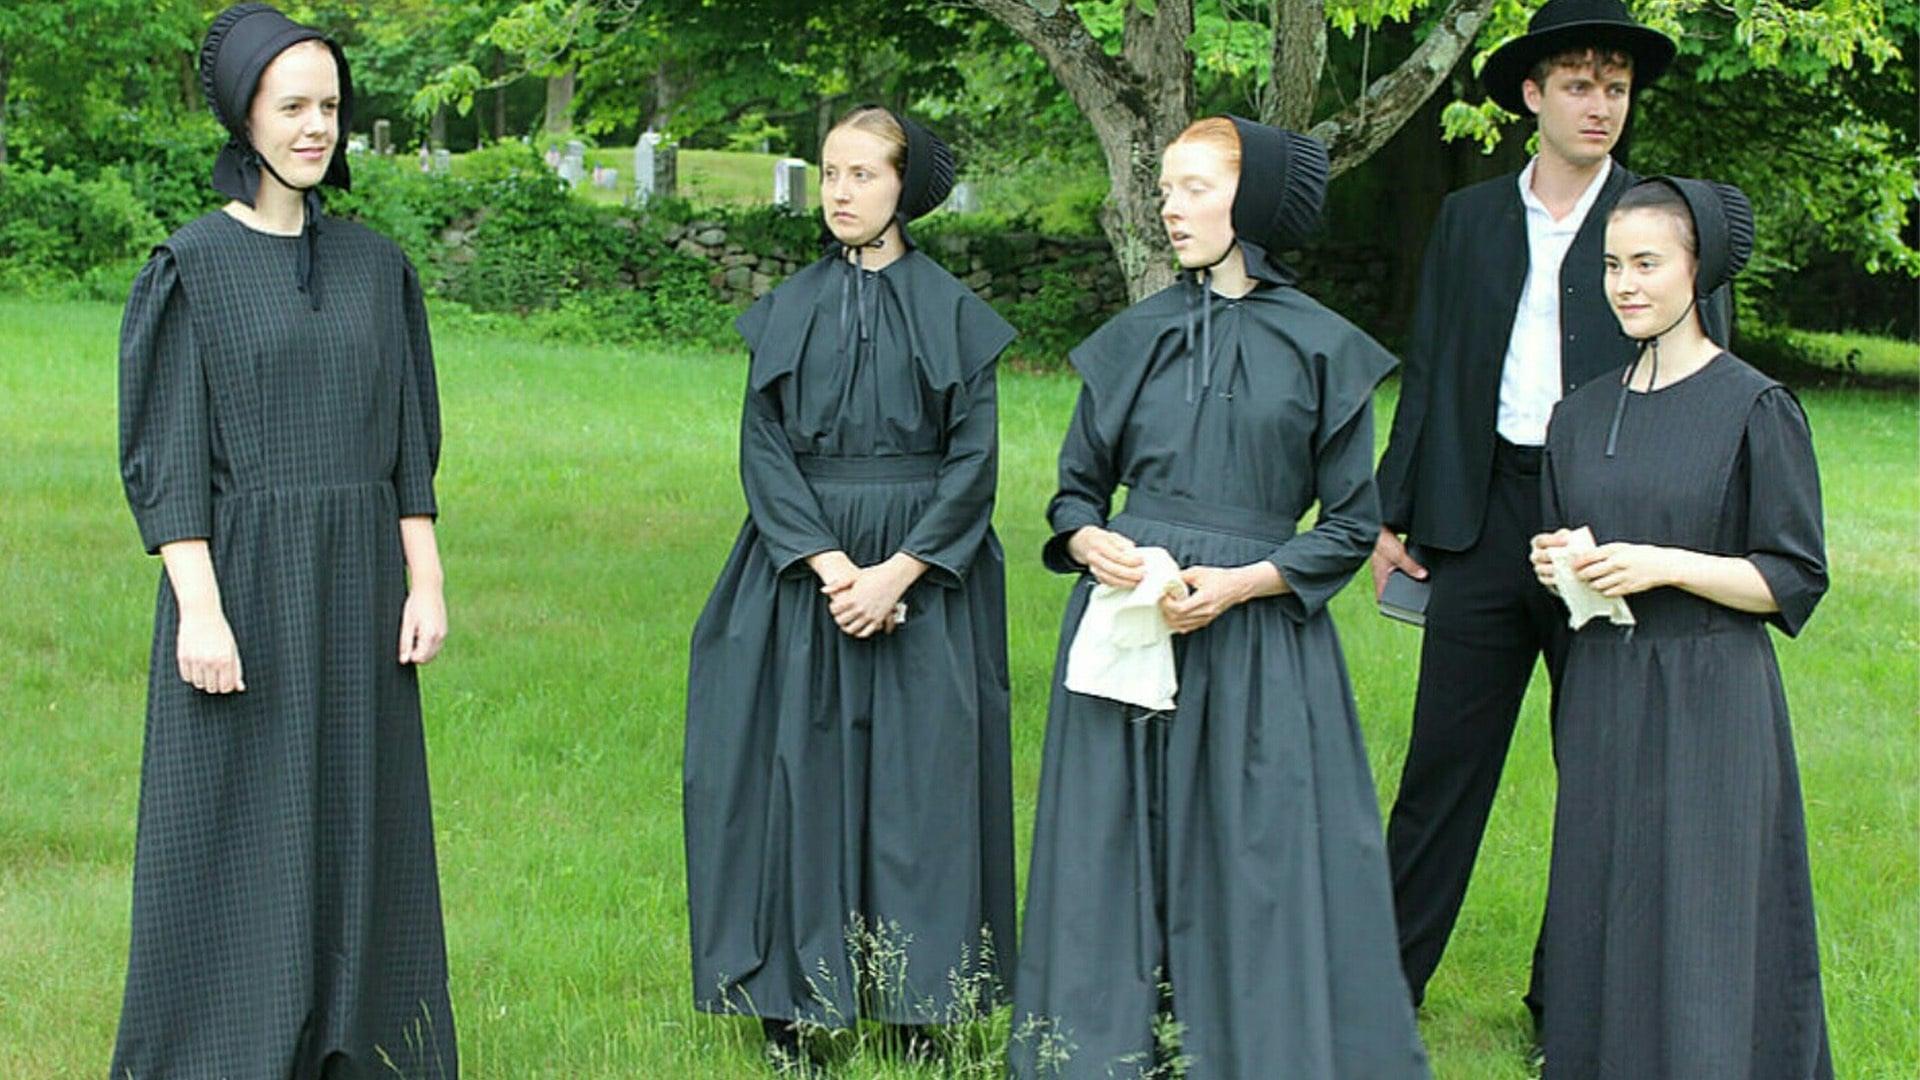 Amish Witches: The True Story of Holmes County backdrop